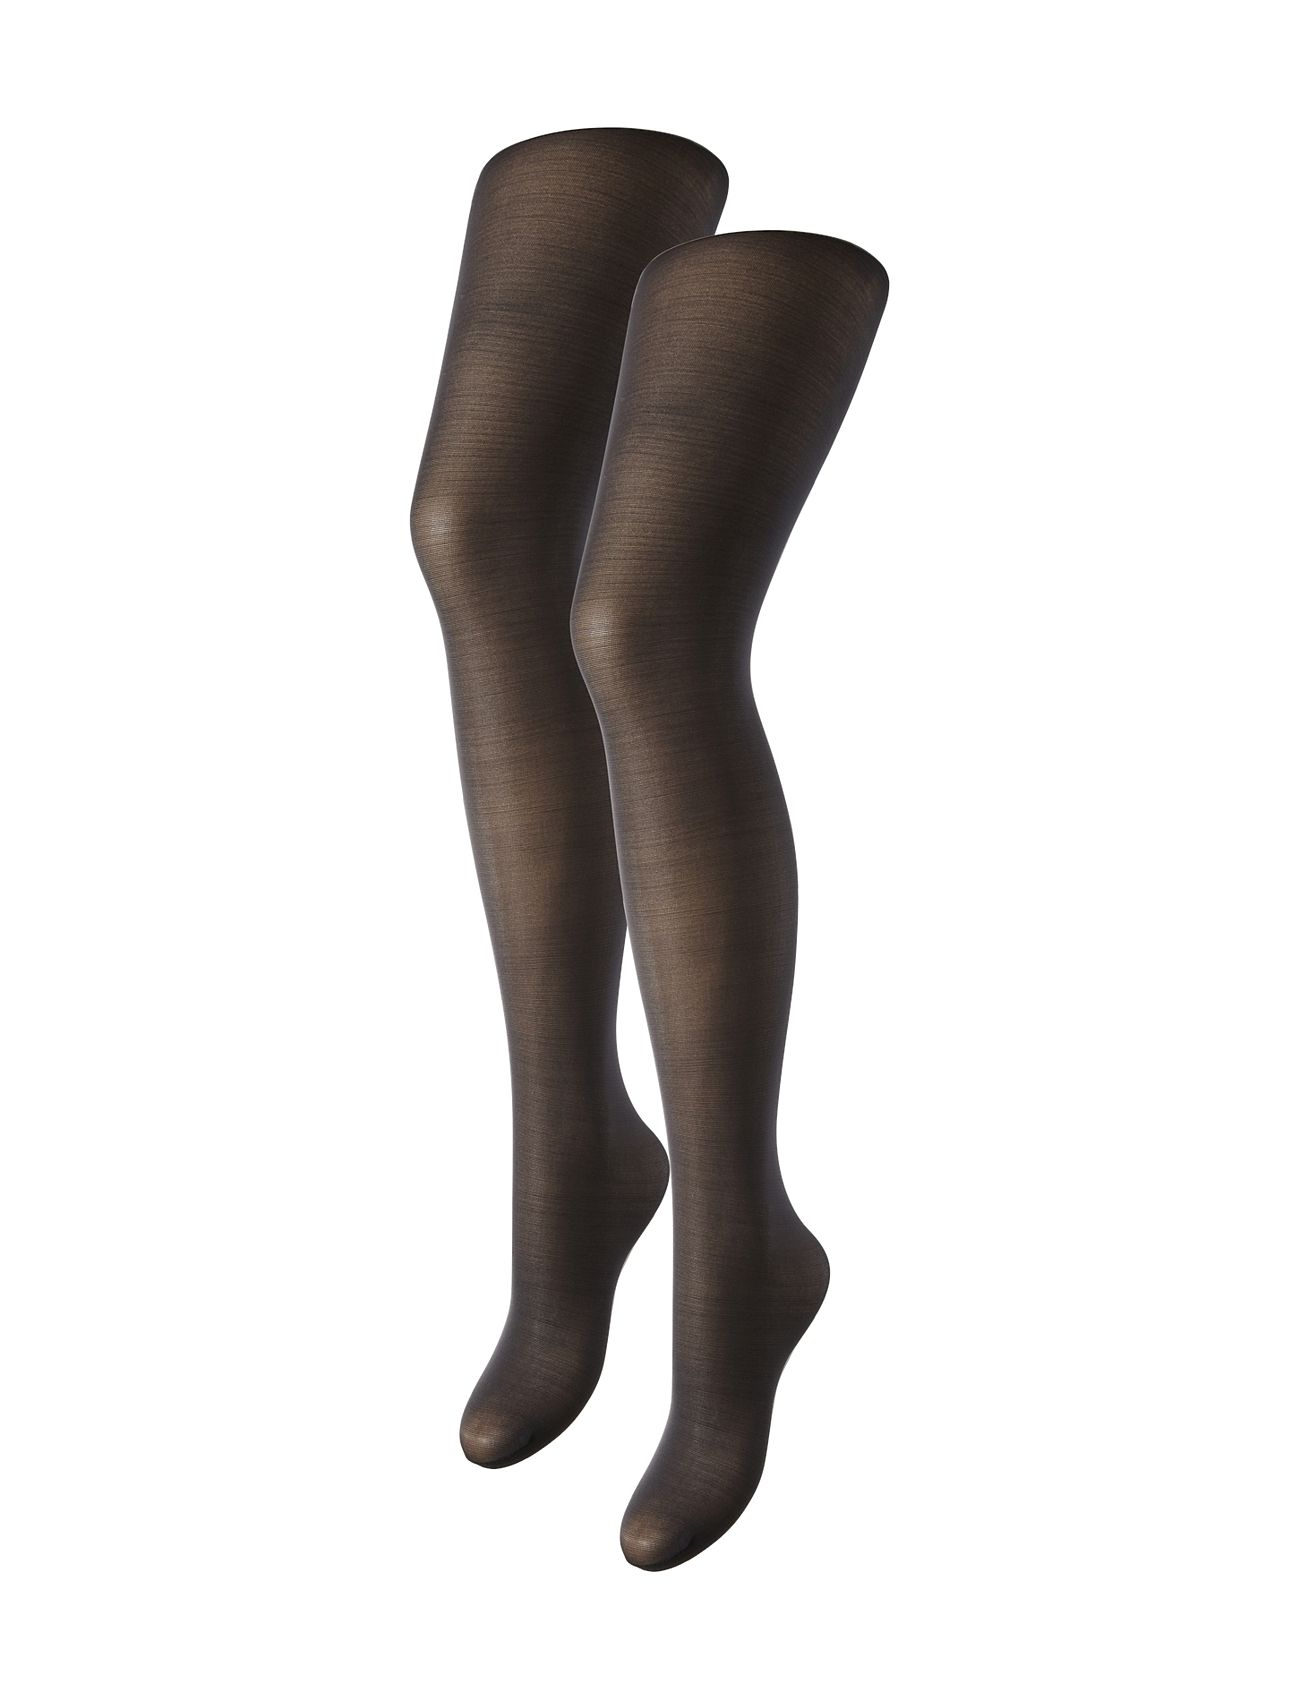 Pieces Pcnew Nikoline 20 Pantyhose Den Tights 2 Pack 